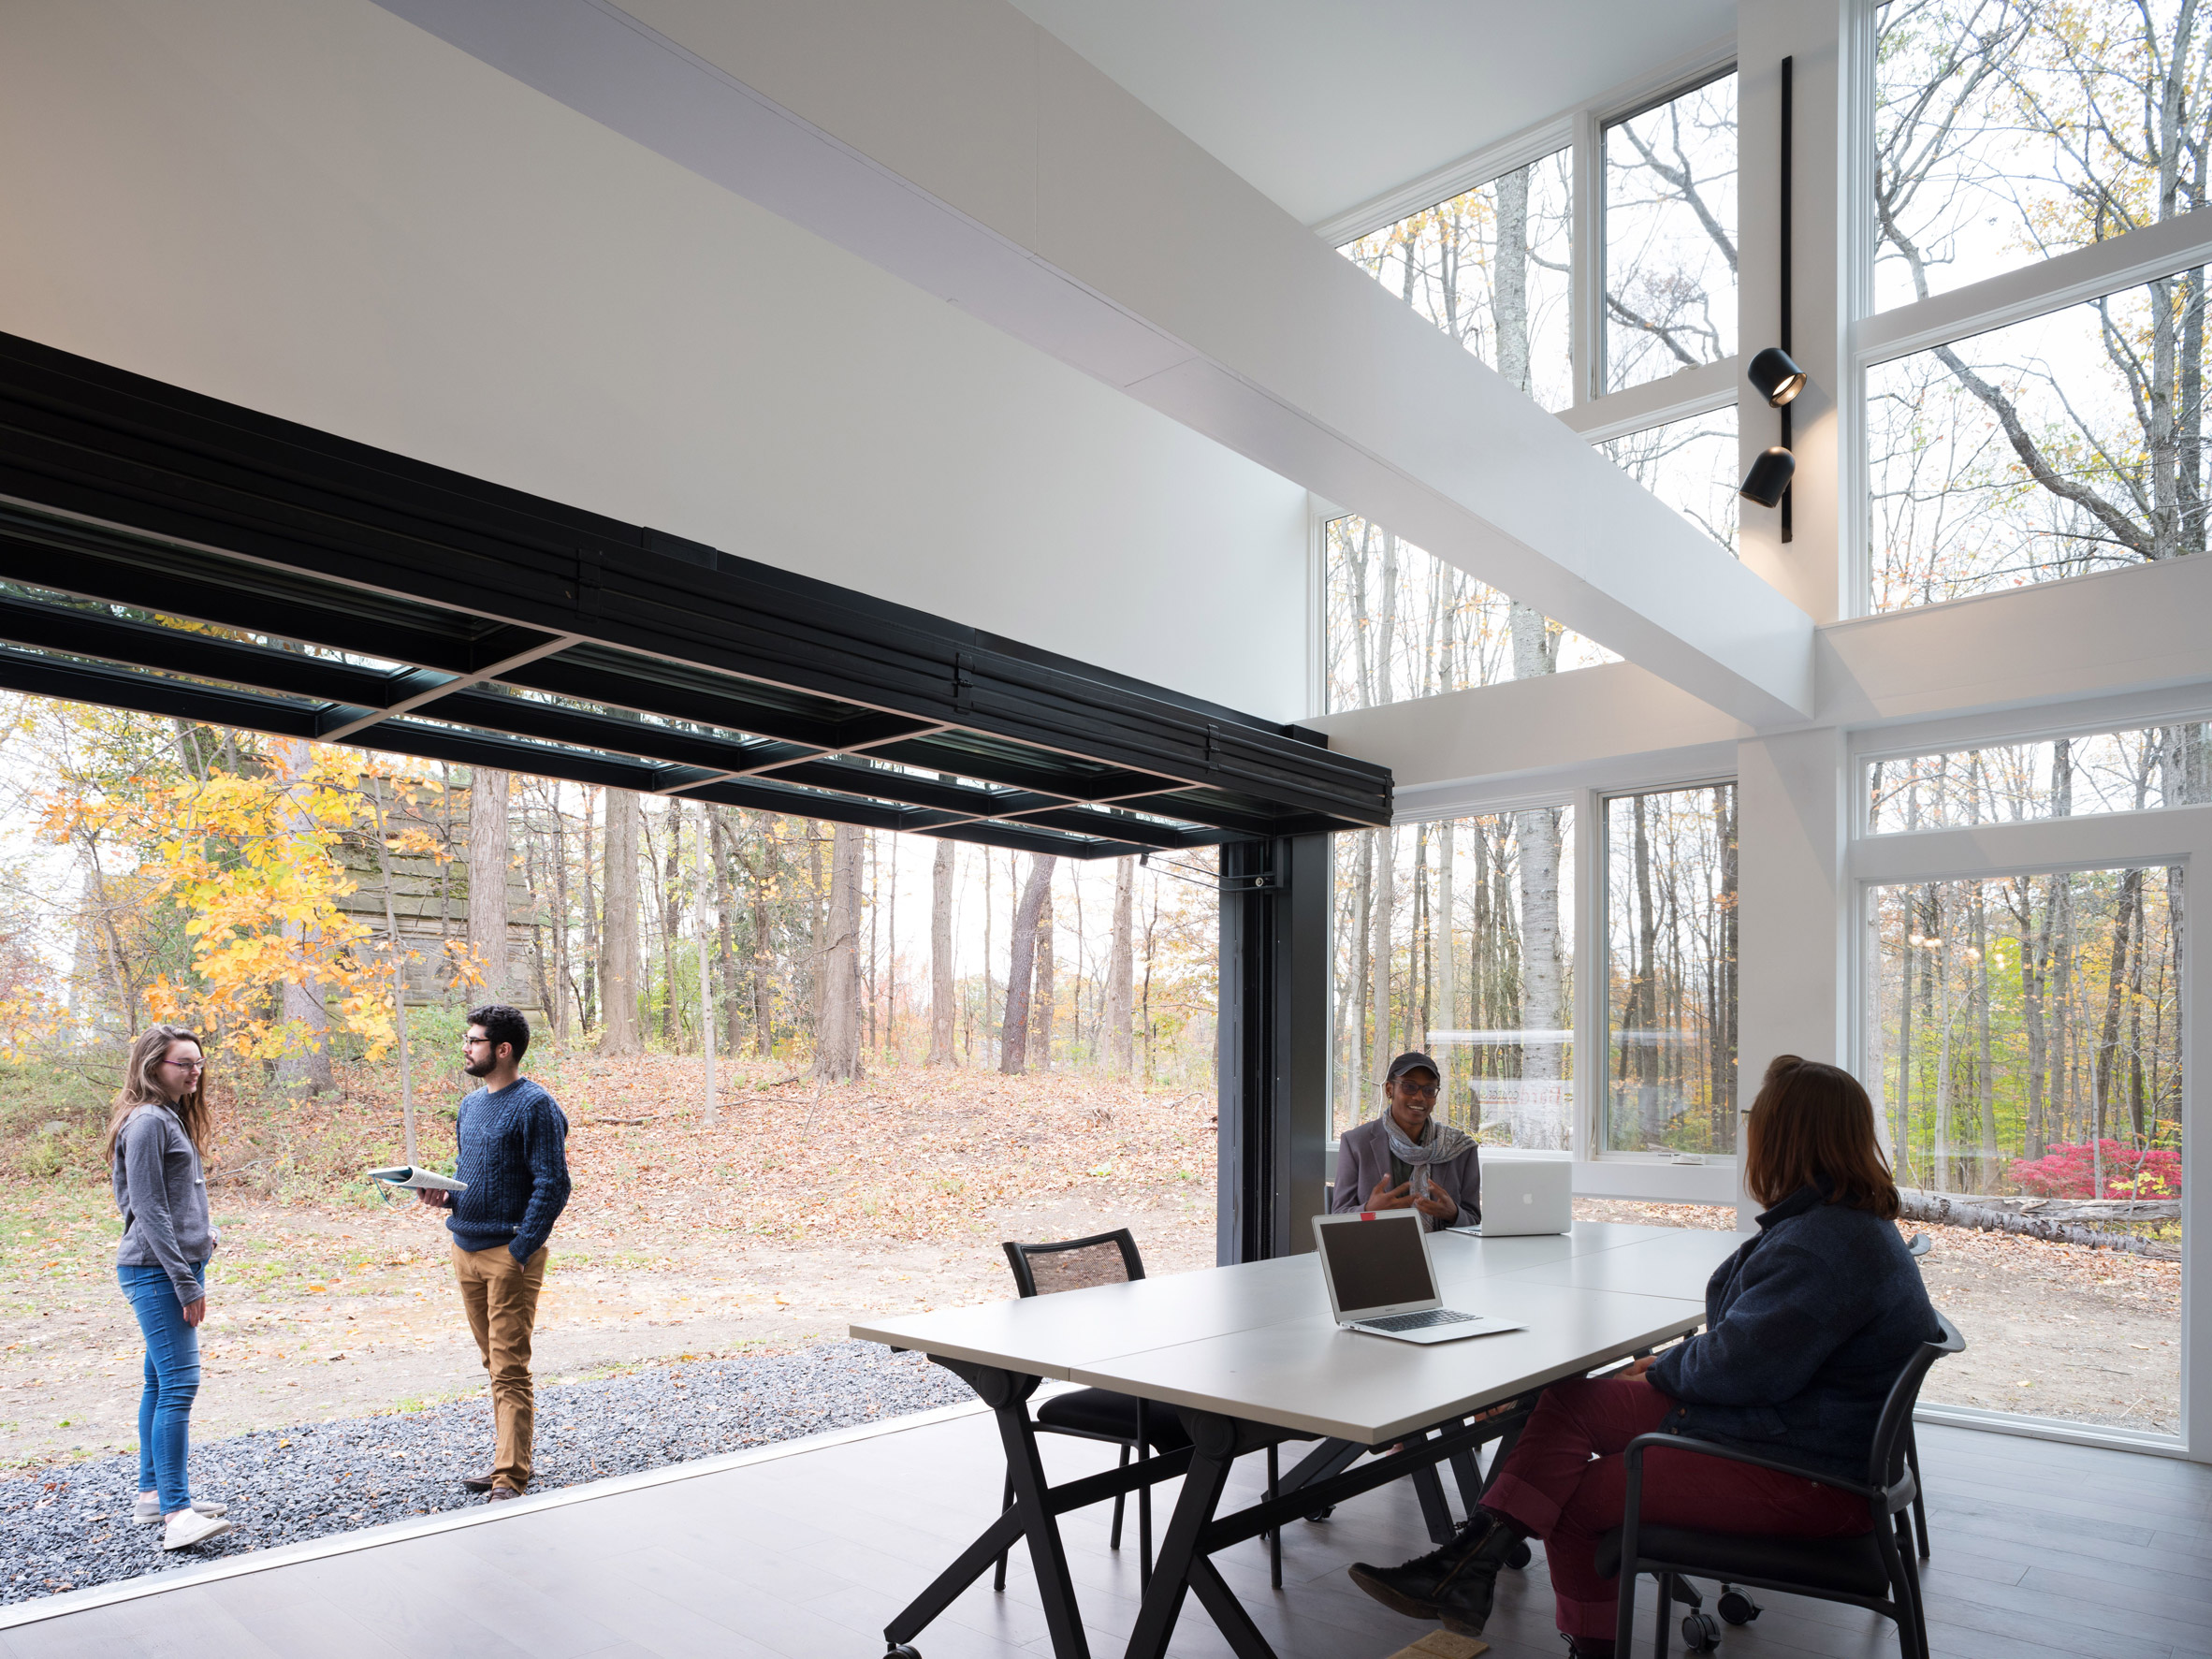 New York Bard College Media Lab by MB Architecture